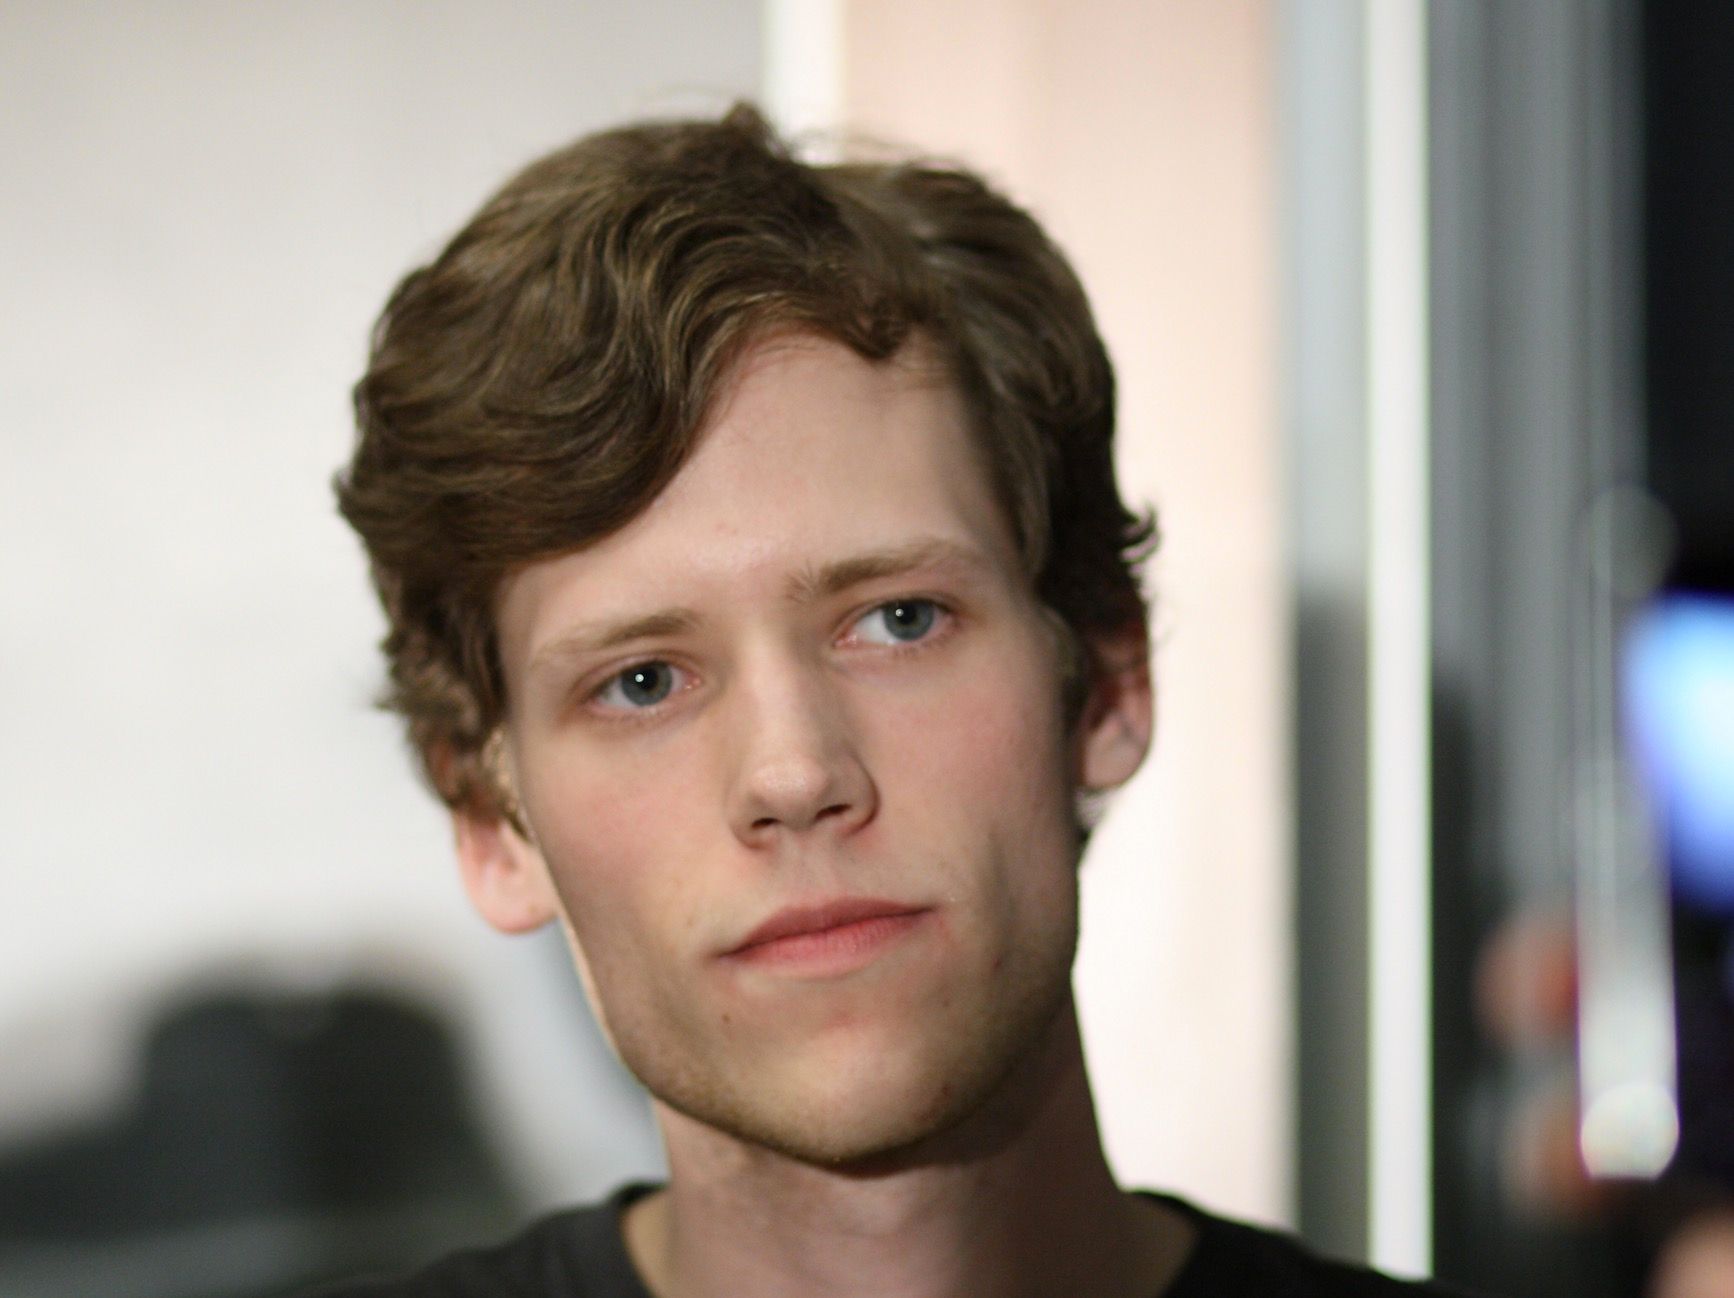 google hires 4chan founder for his expertise in online communities image 1